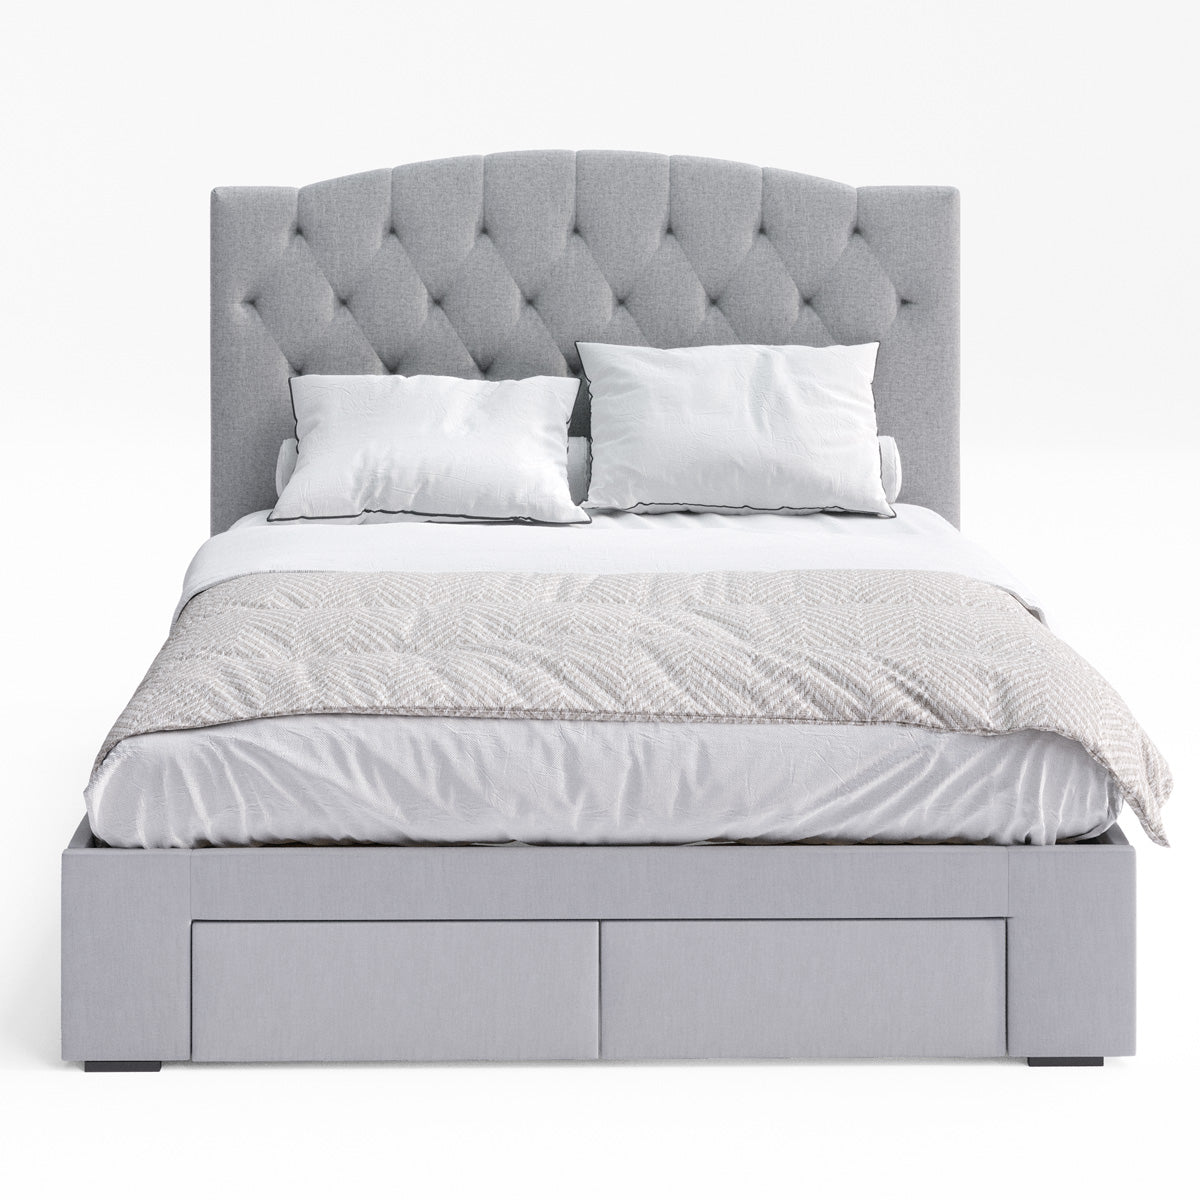 Charlotte Curved Bed Frame with Four Storage Drawers (Grey Fabric)